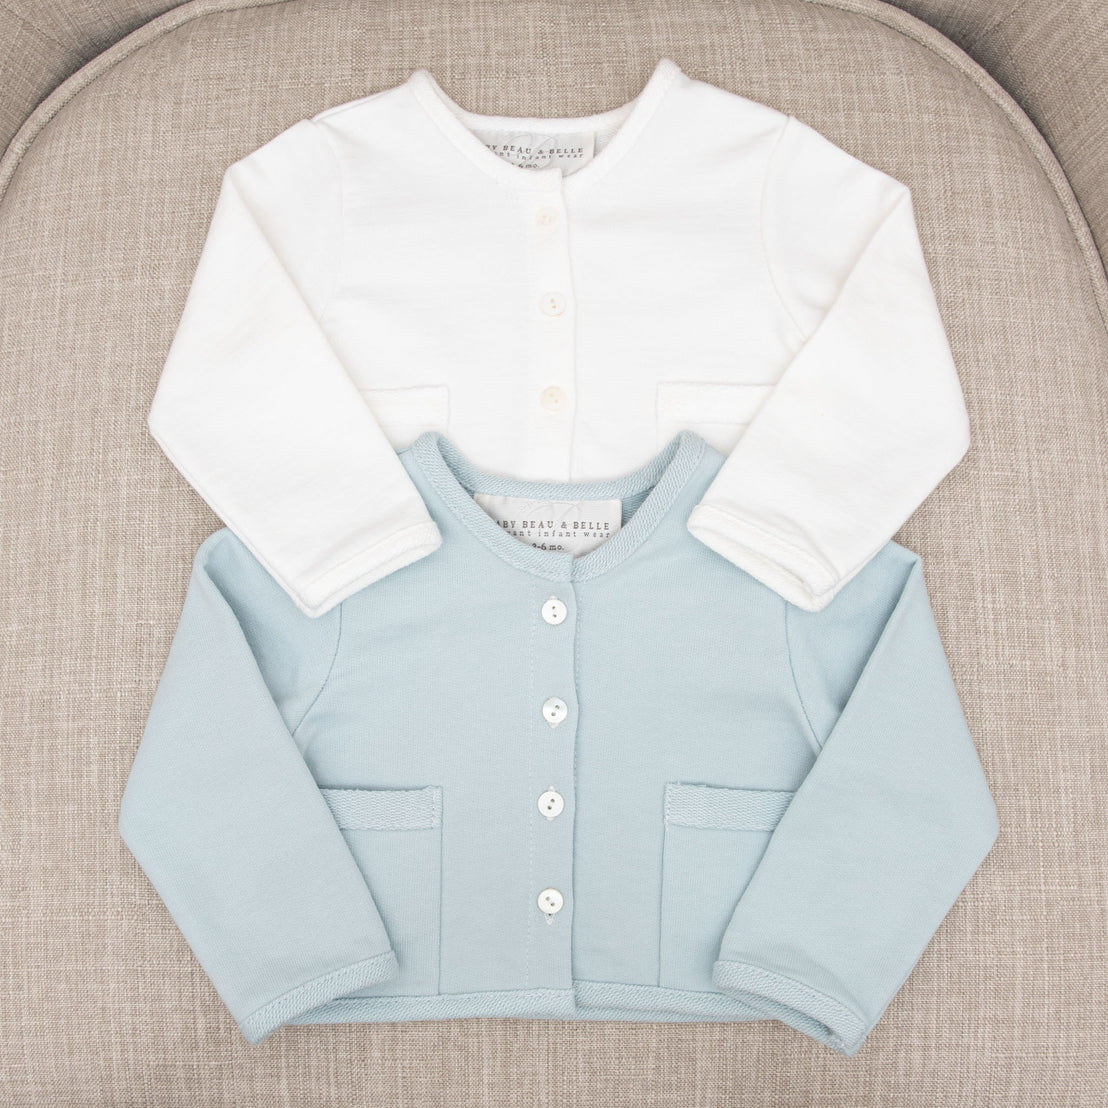 Two Ian French Terry Jackets laid flat on a gray textured chair; the top one is white and the bottom one is light blue, both with front buttons from a boutique.